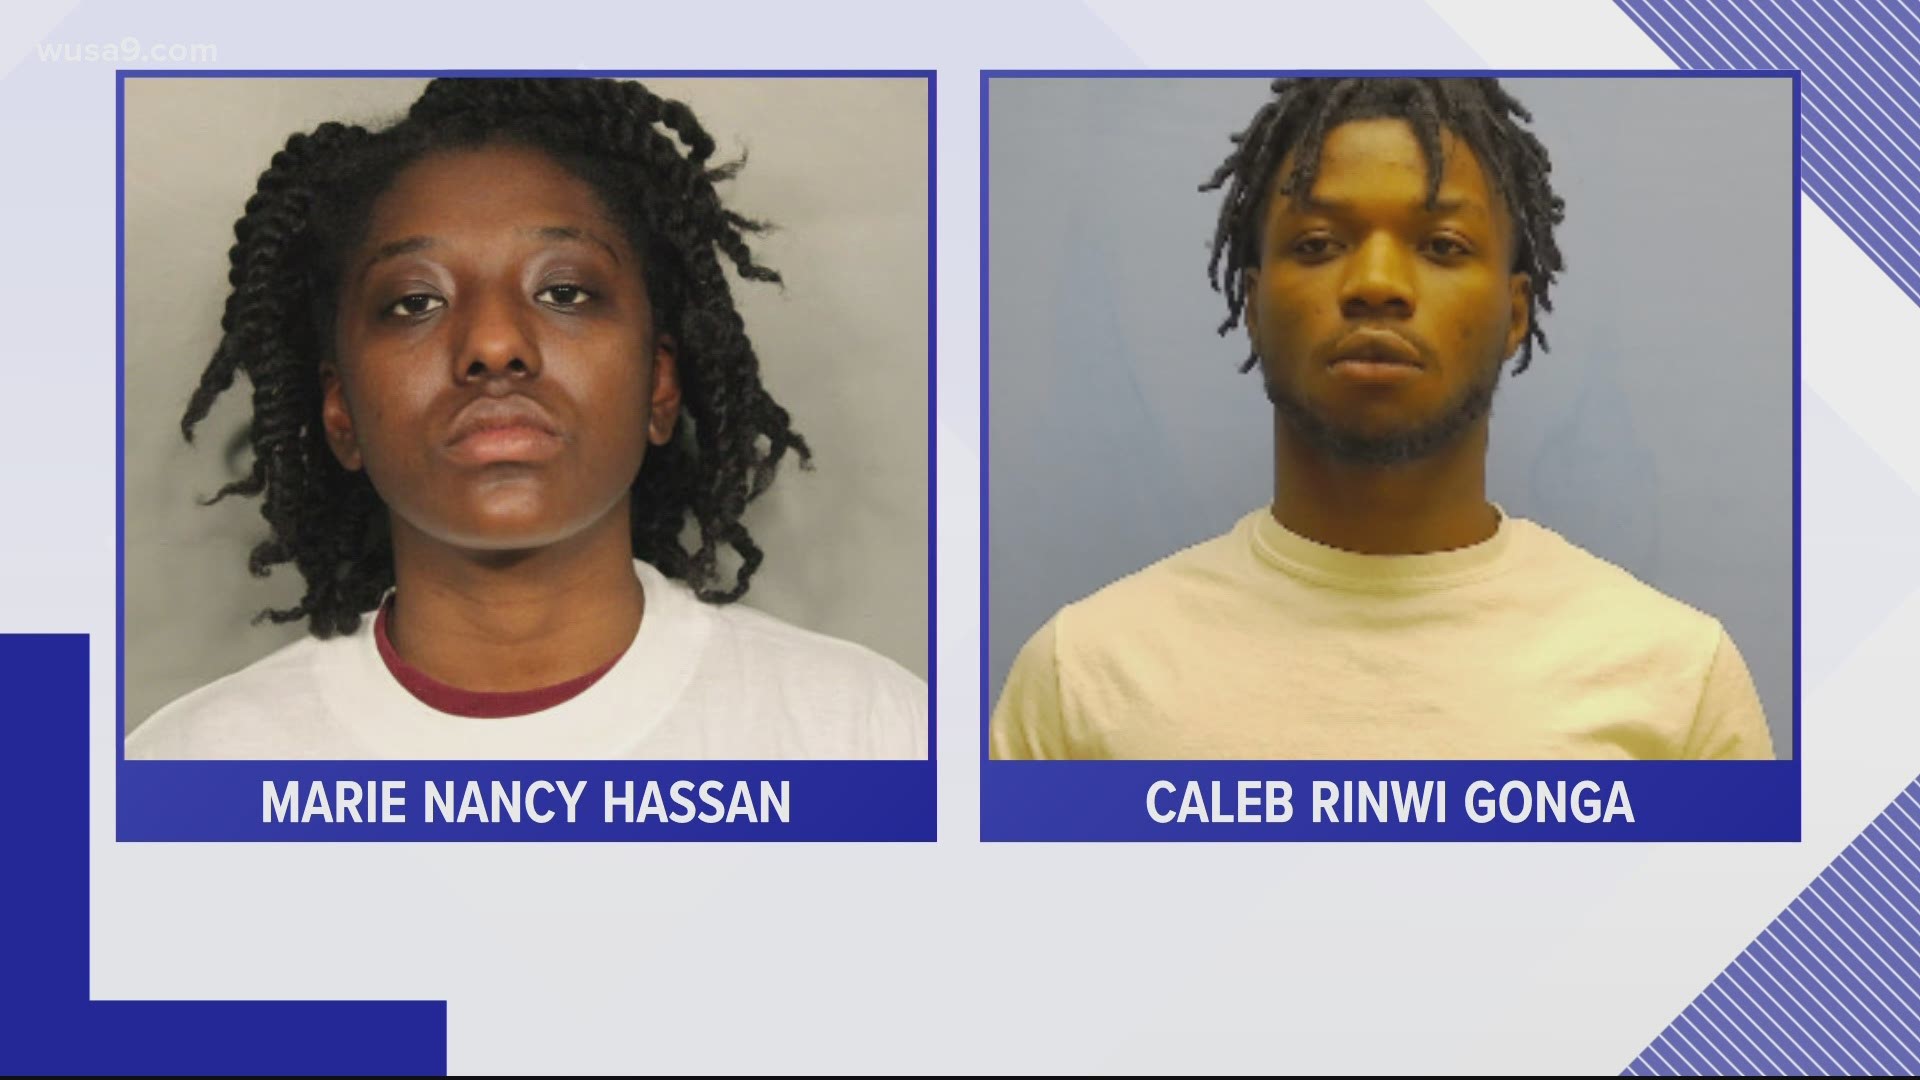 Marie Hassan, 23, of Hyattsville and Caleb Gonga, 21, of Lanham were arrested and charged with murder in connection to the death of 43-year-old Brian Bregman.